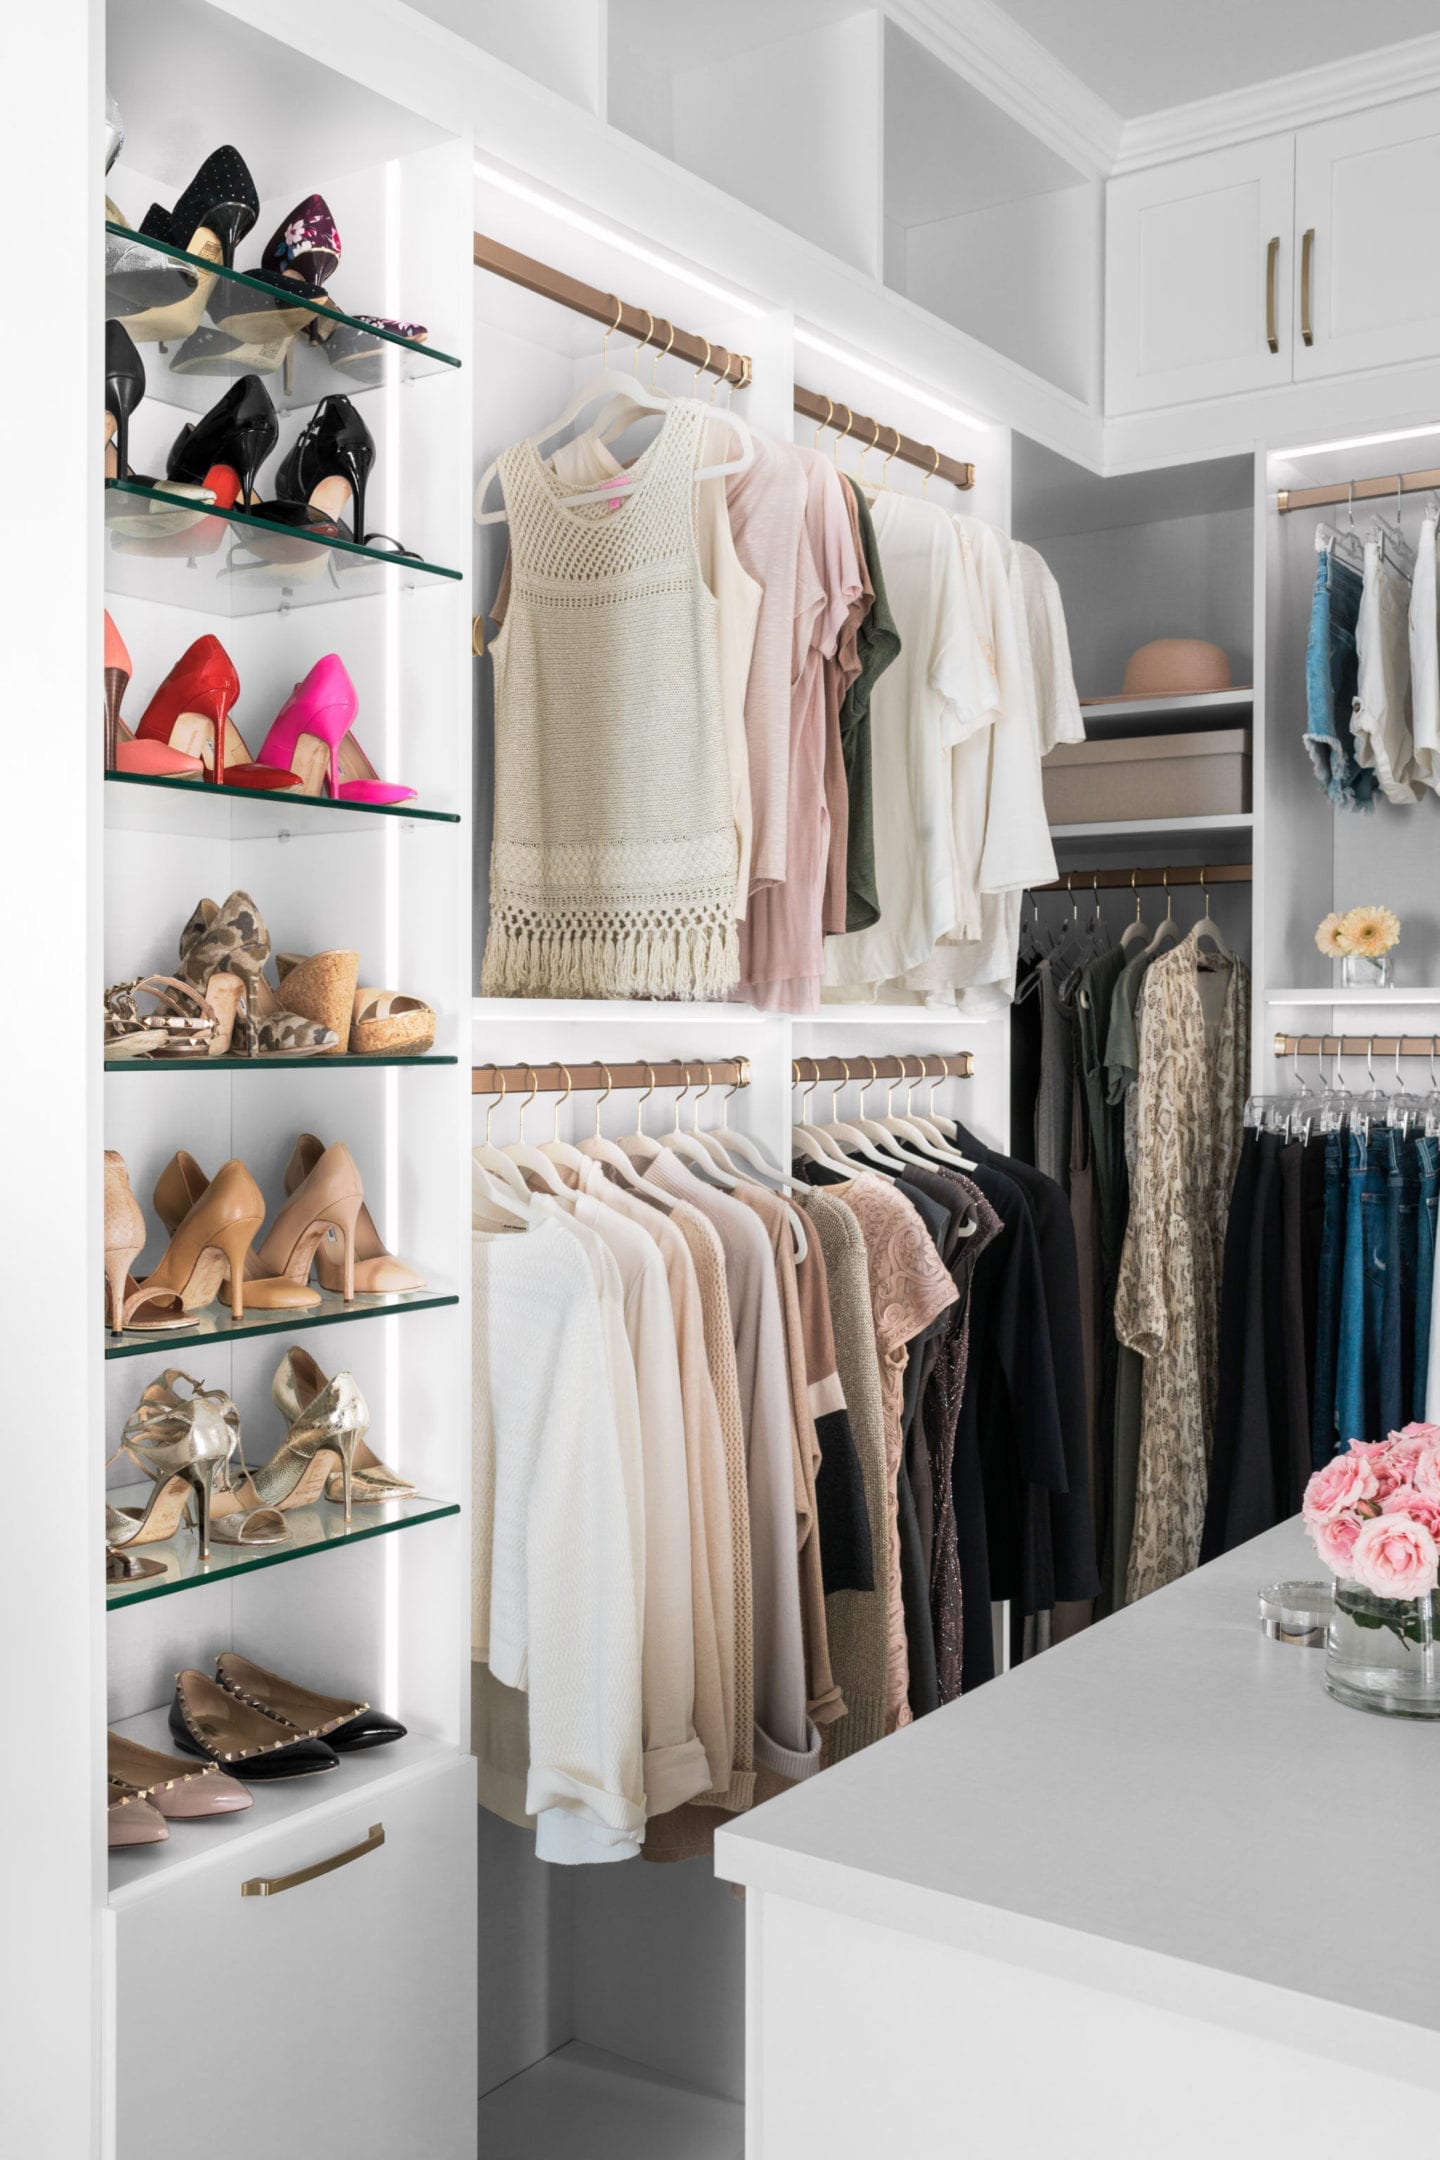 Closet Lighting Ideas in the home of home blogger BlueGrayGal. LED light strips light a shoe display and hanging racks for a retail-like closet.